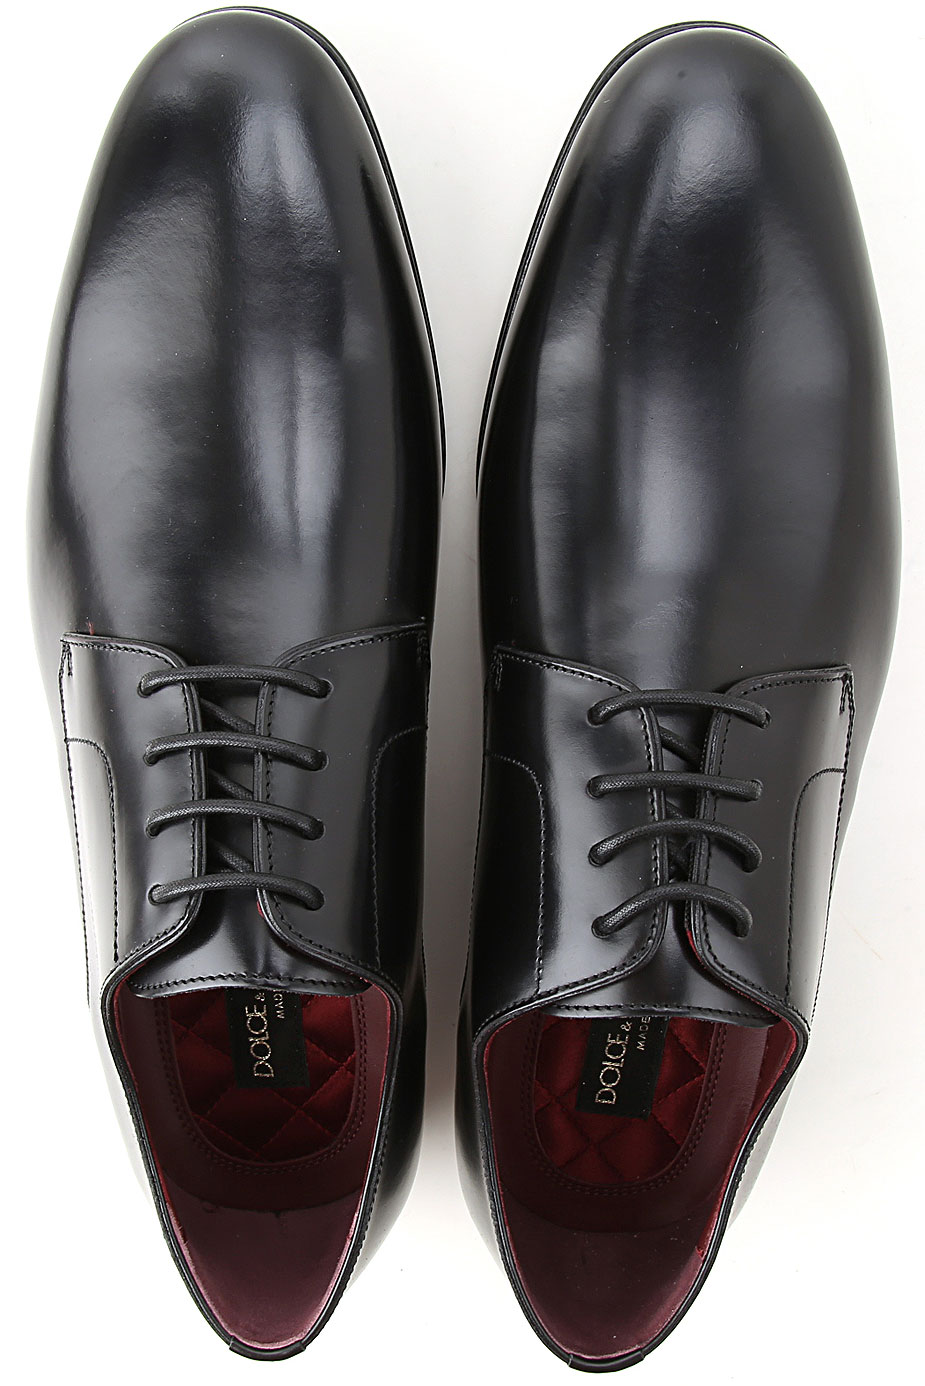 Mens Shoes Dolce & Gabbana, Style code: a10465-a1203-80999